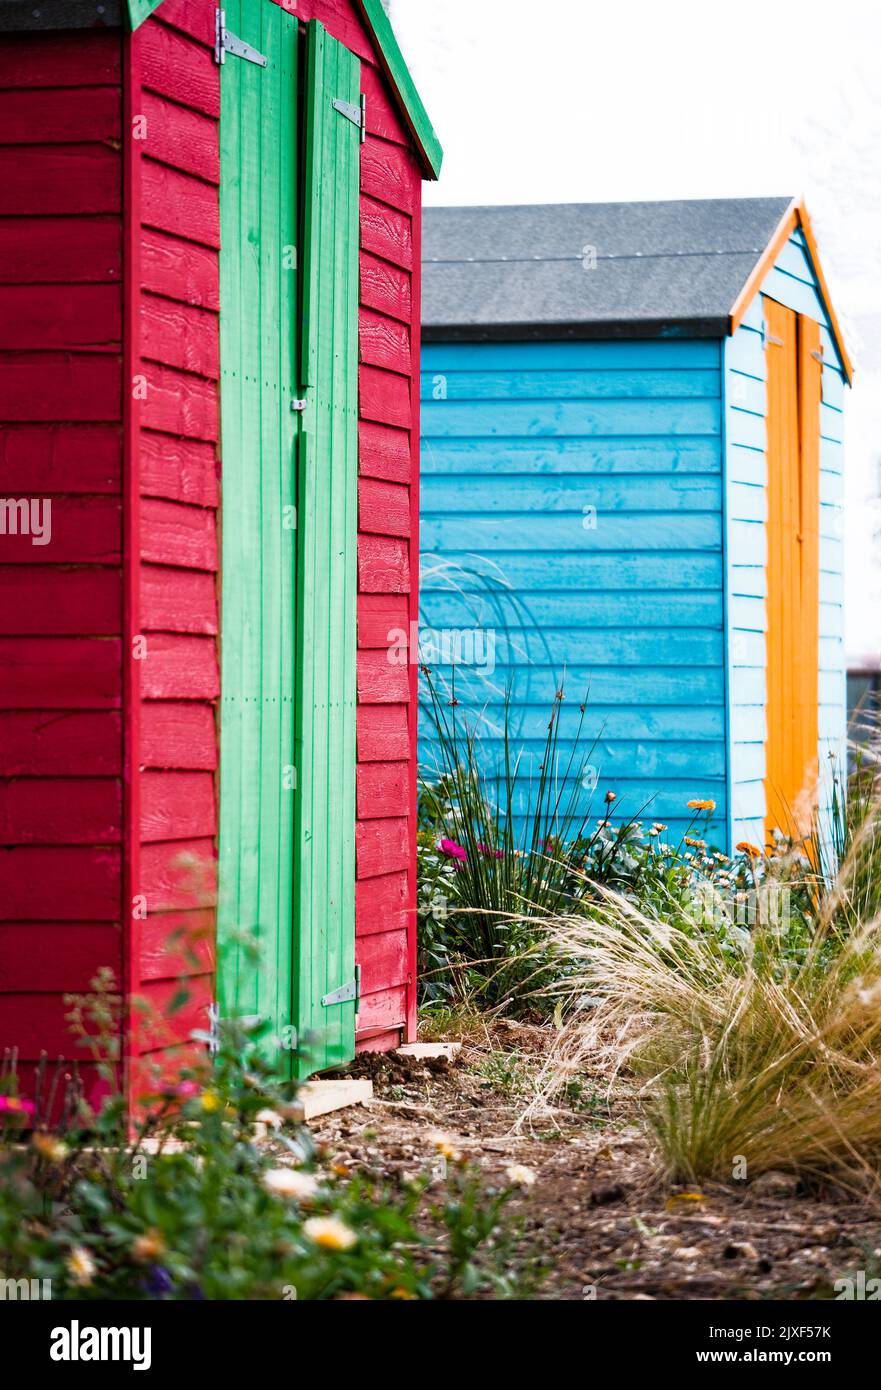 Brightly coloured painted gardening sheds at 'Dahlia Beach' dahlia farm at Millets Farm Stock Photo